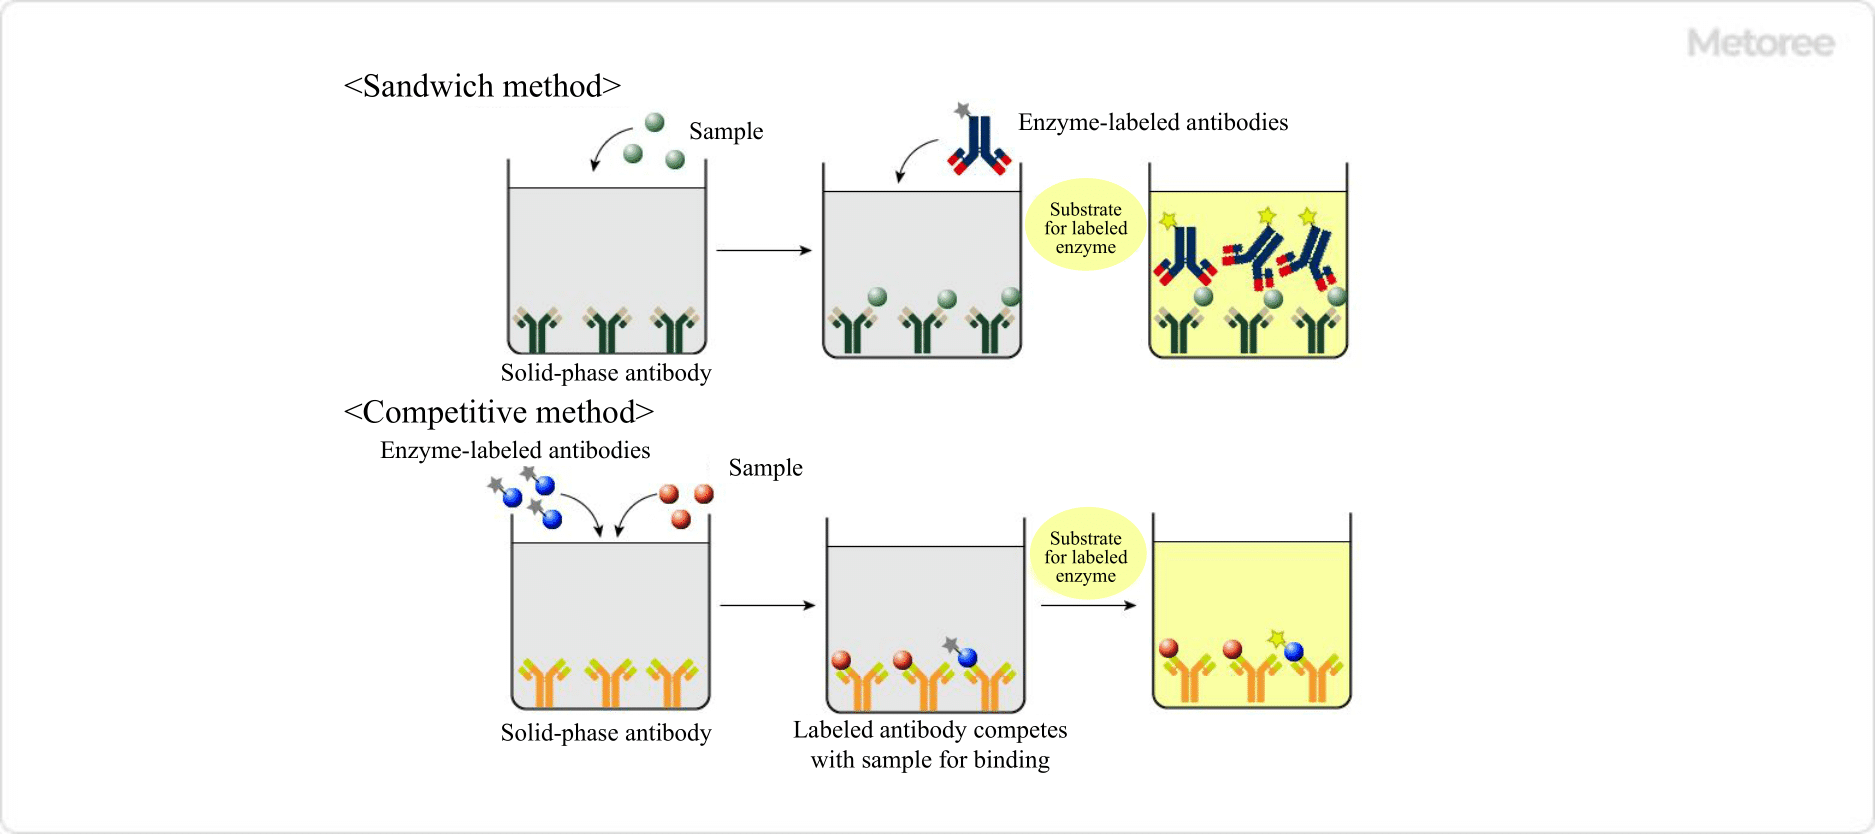 Figure 3. Sandwich and competitive methods